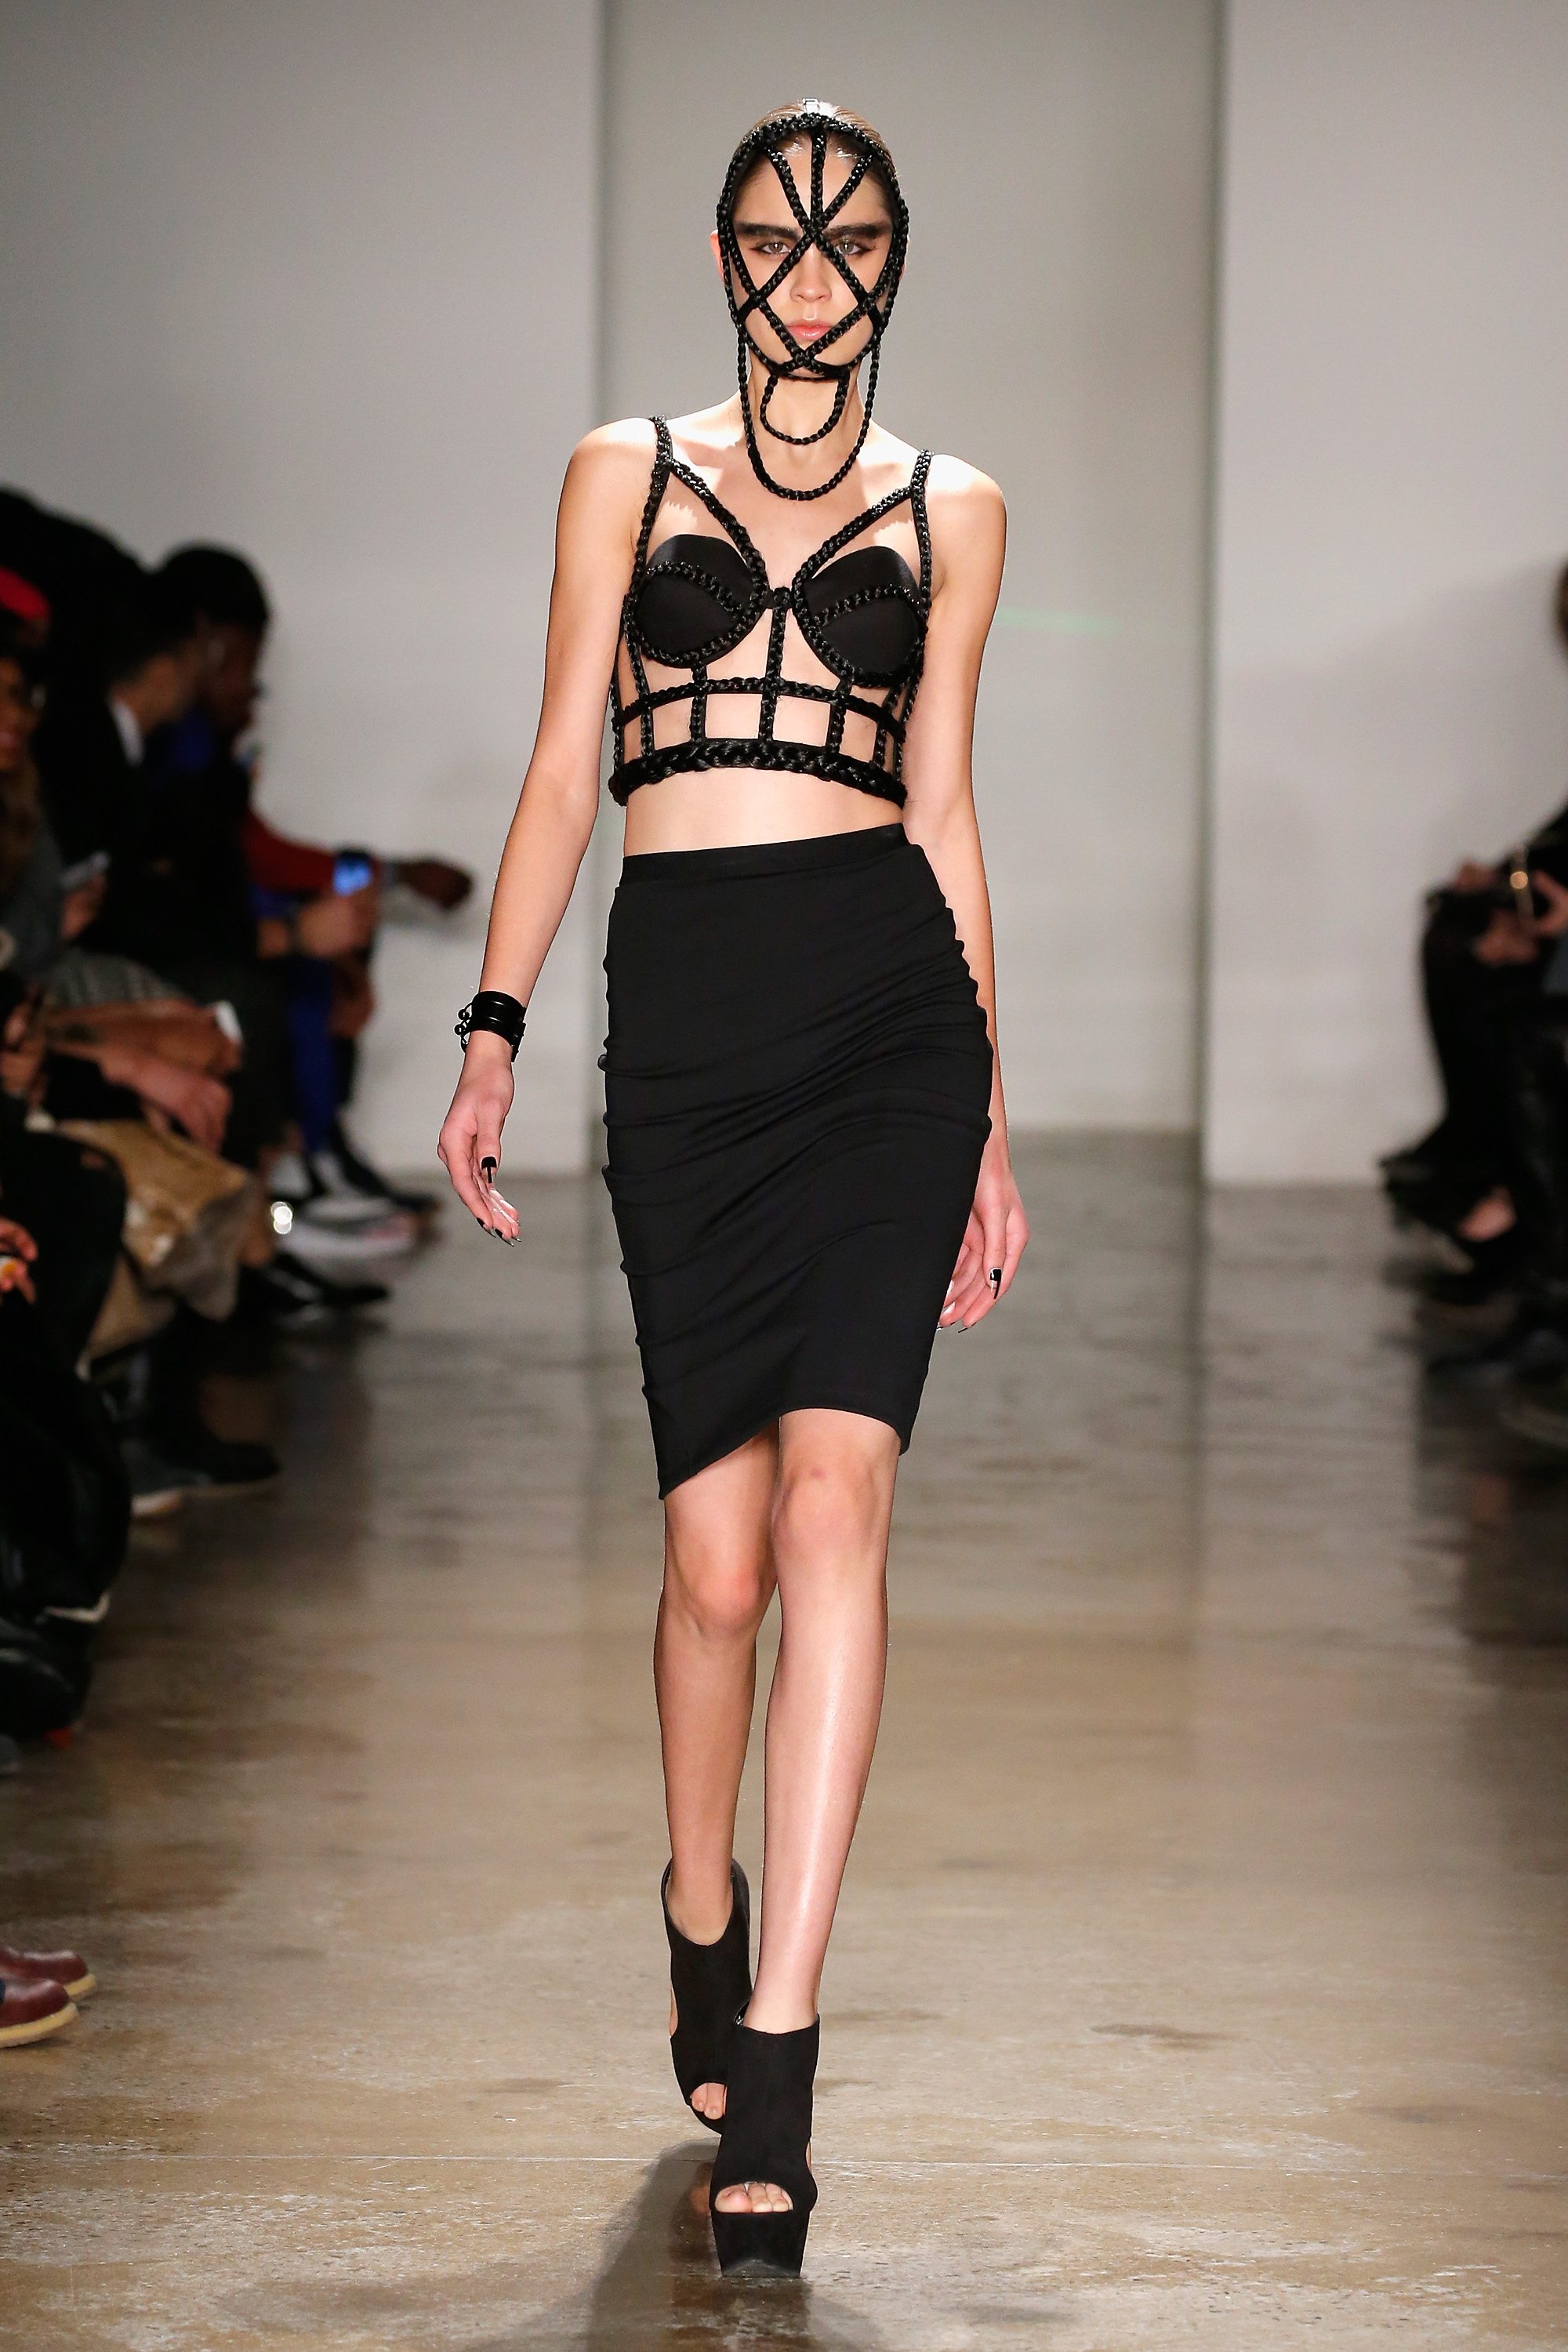 At Chromat, even the models' headgear showed hints of BDSM (Photo: Getty).